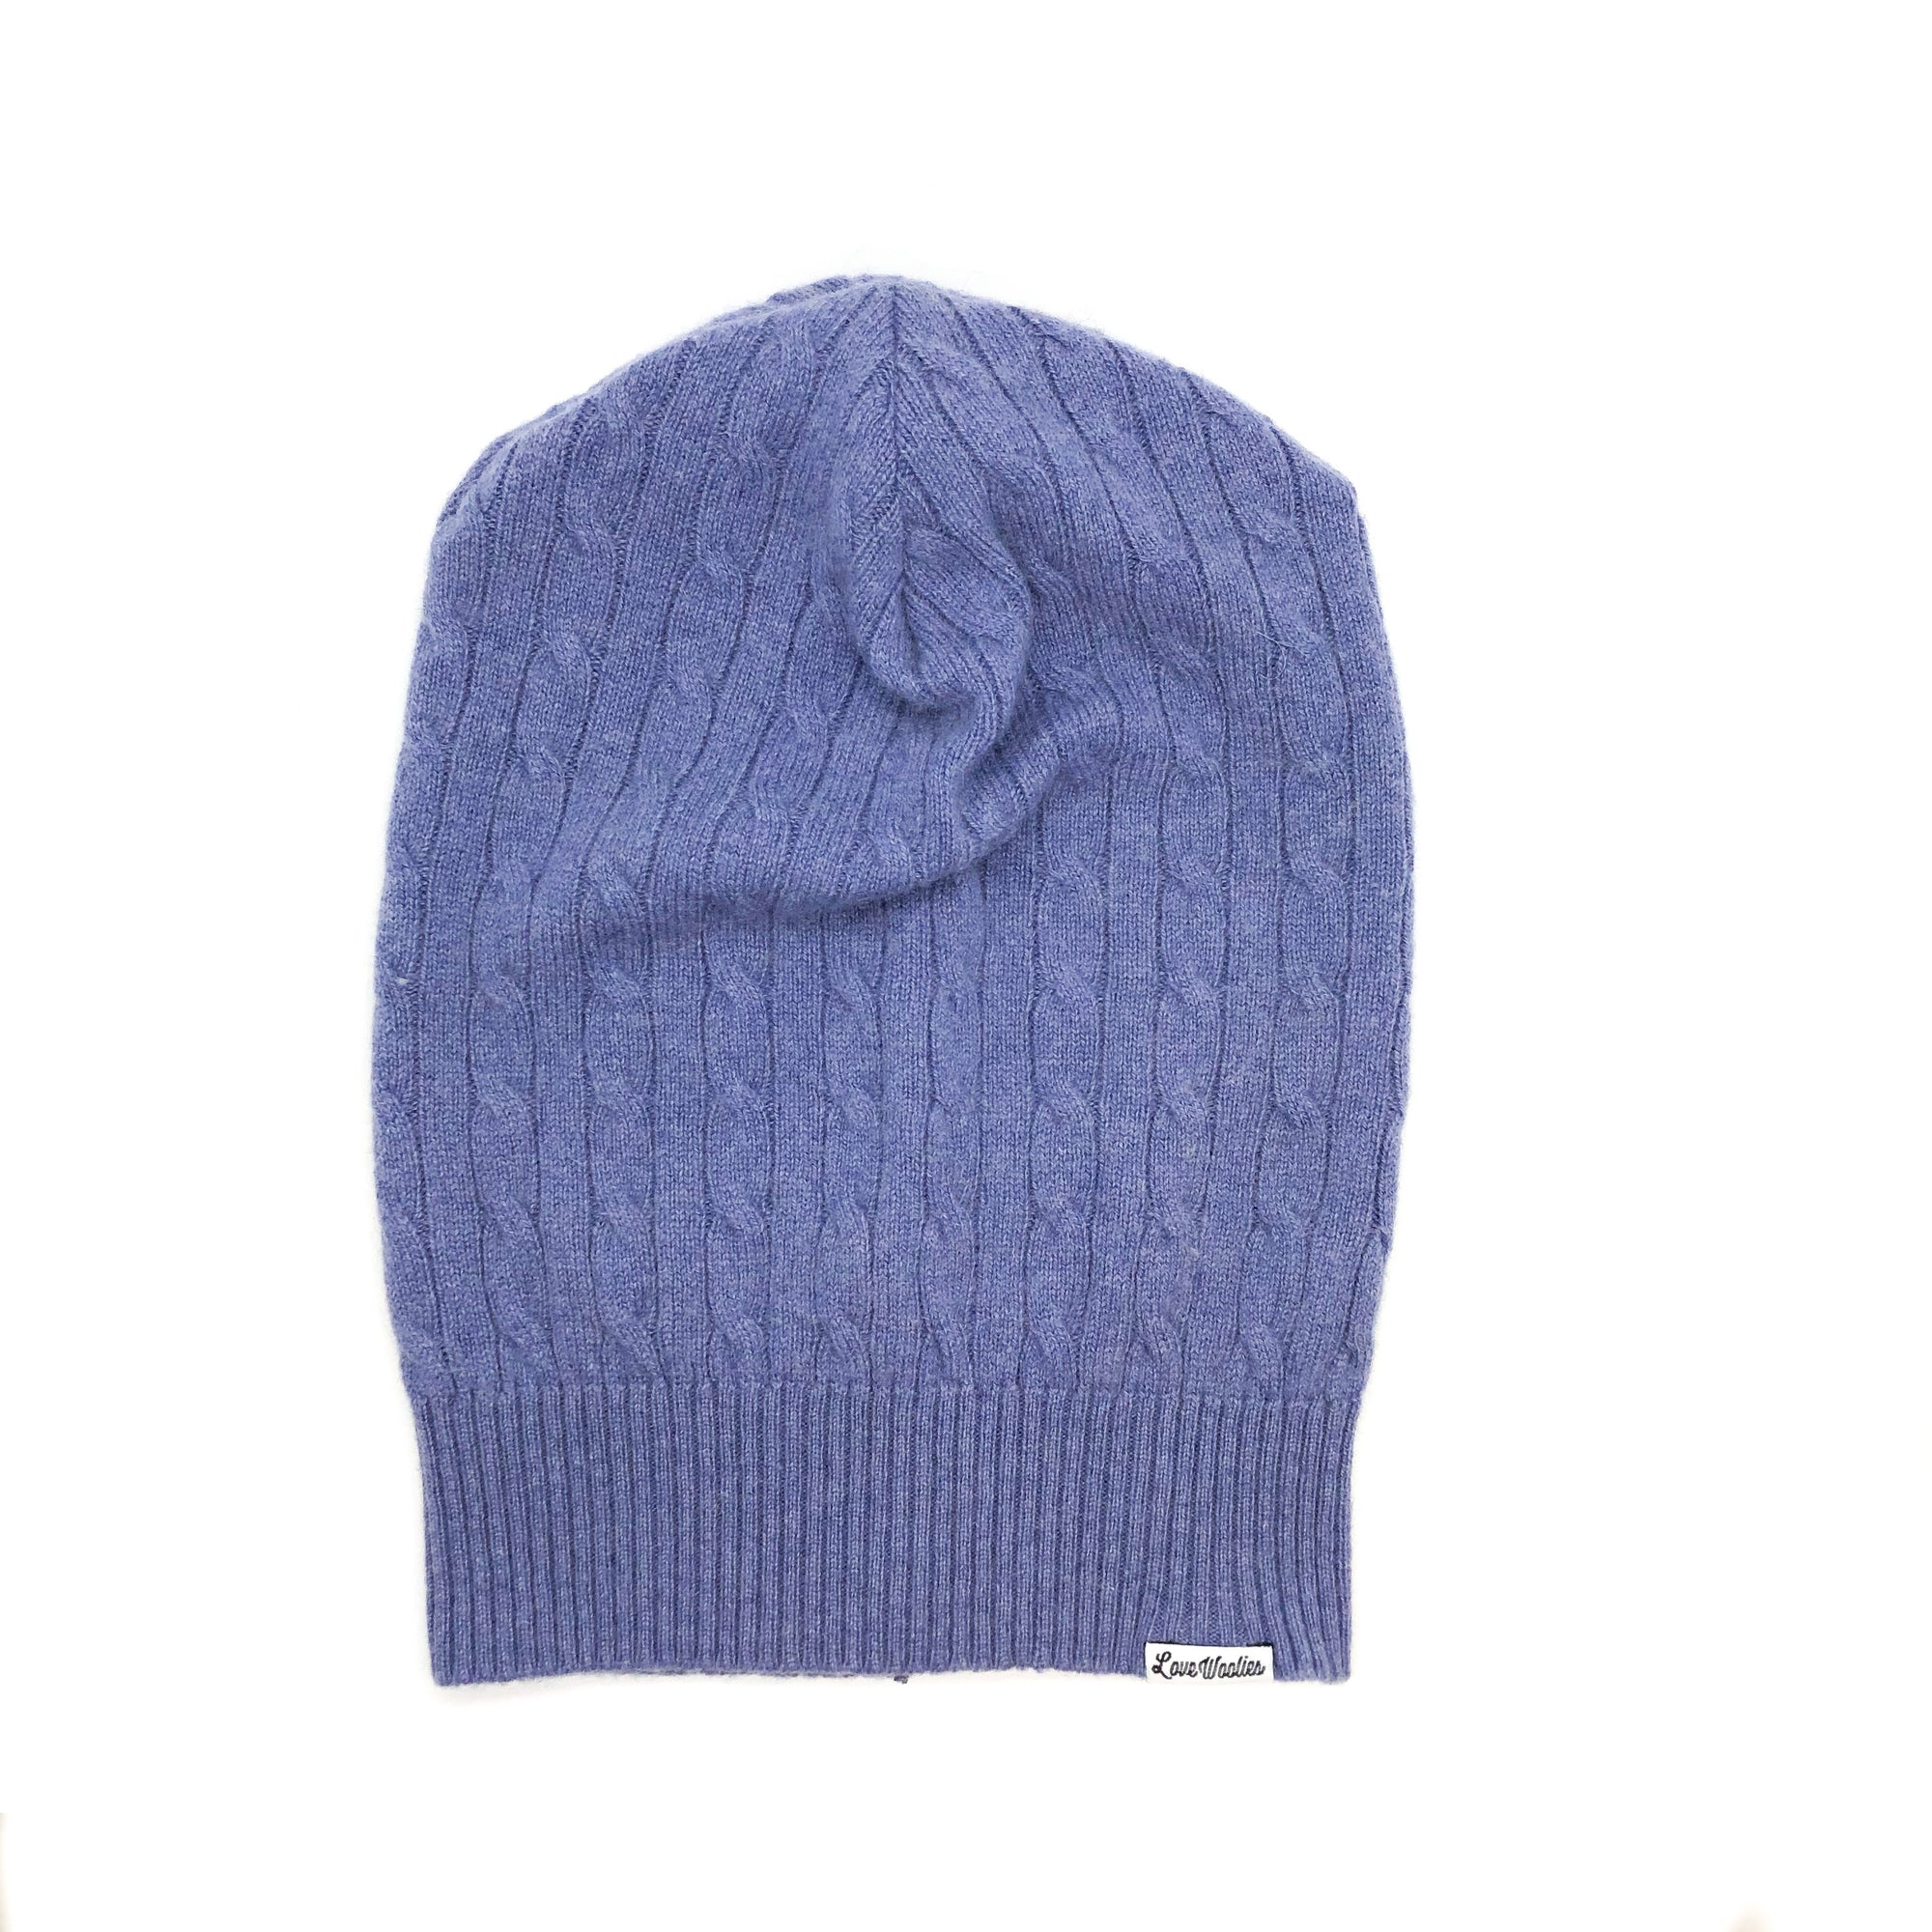 CASHMERE BEANIE |  Periwinkle Cable Knit